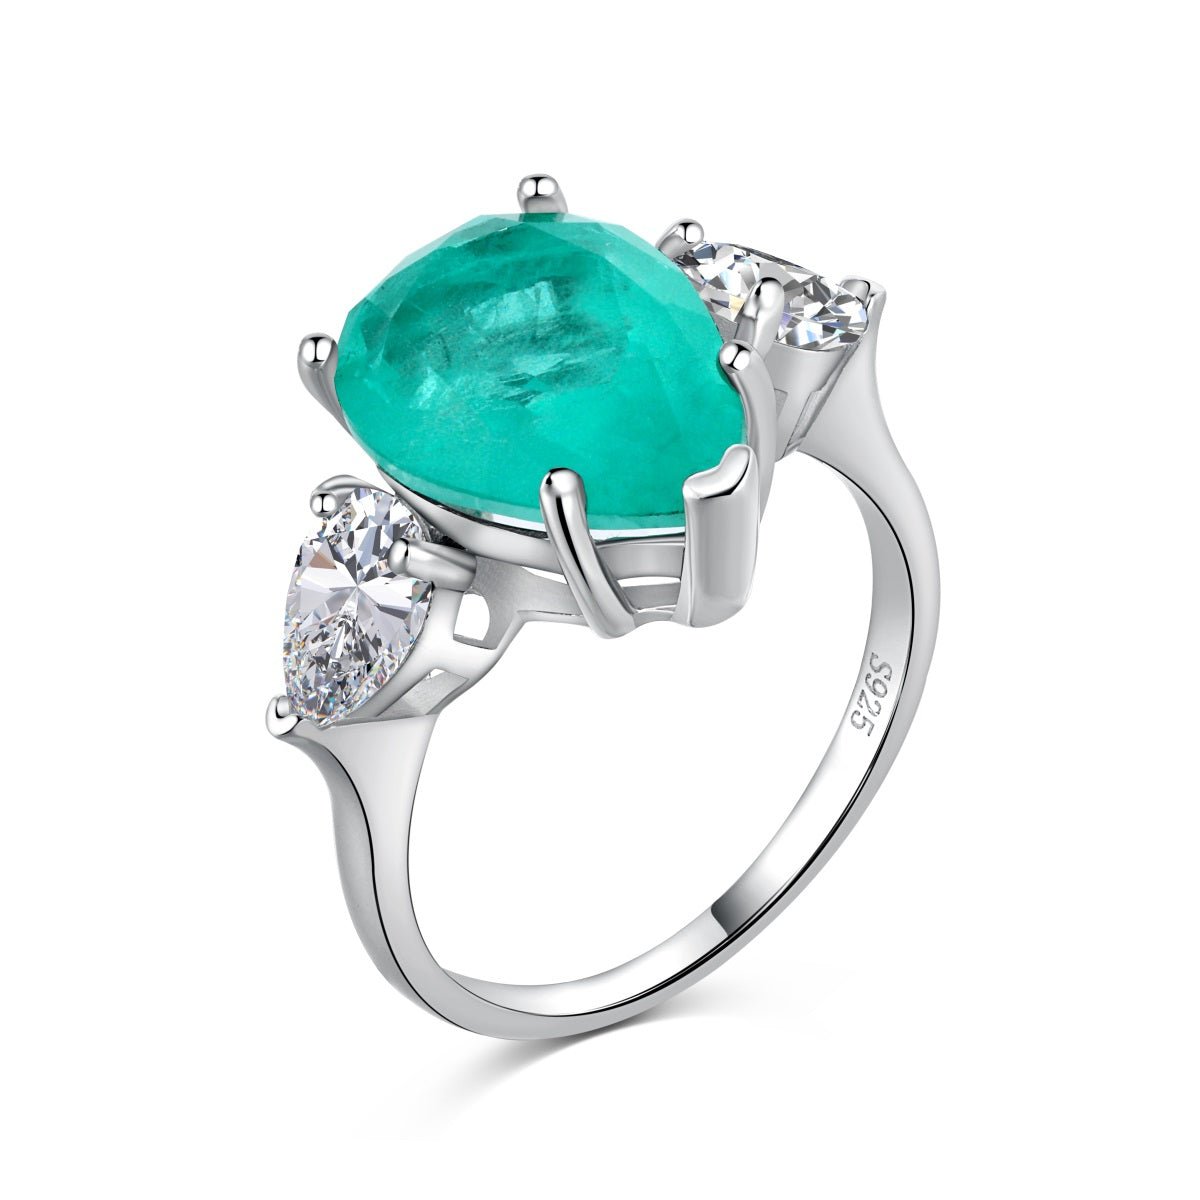 Women's Silver Ring with Turquoise Cubic Zirconia Stone - Jewelry - EM Accessories - 925 silver - new - SILVER-0038-6-RING